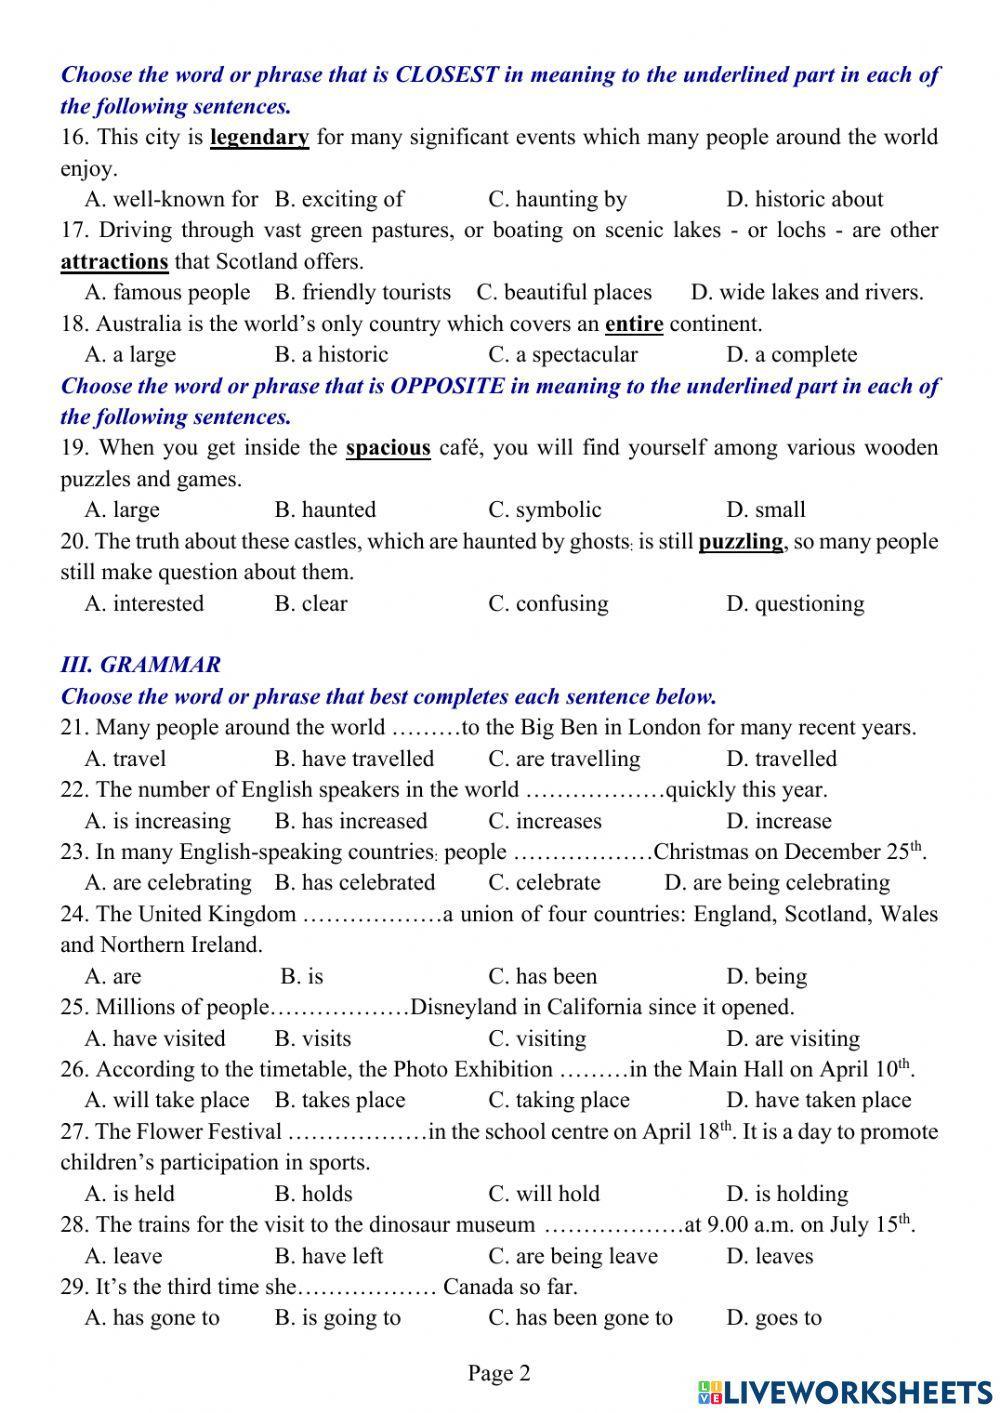 Tieng Anh Lop 8 - 2nd Mid-Term Test 02